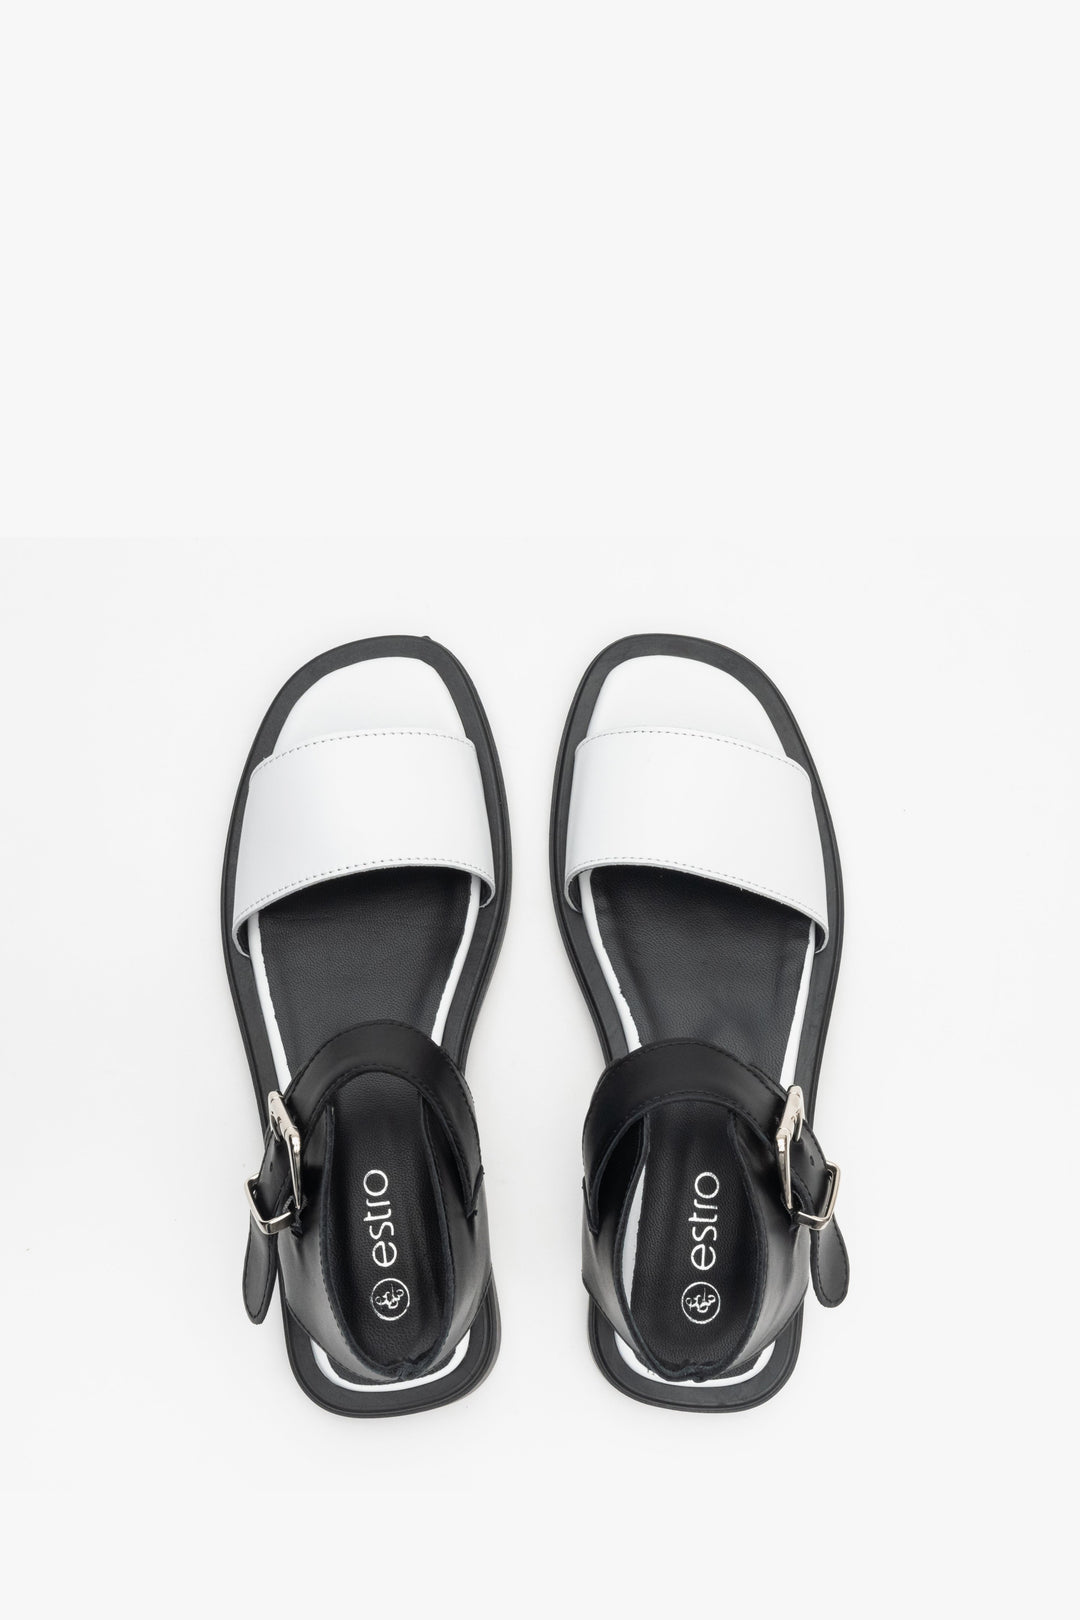 Soft sandals for women made of Italian natural leather in black and white Estro: presentation of the model from above.